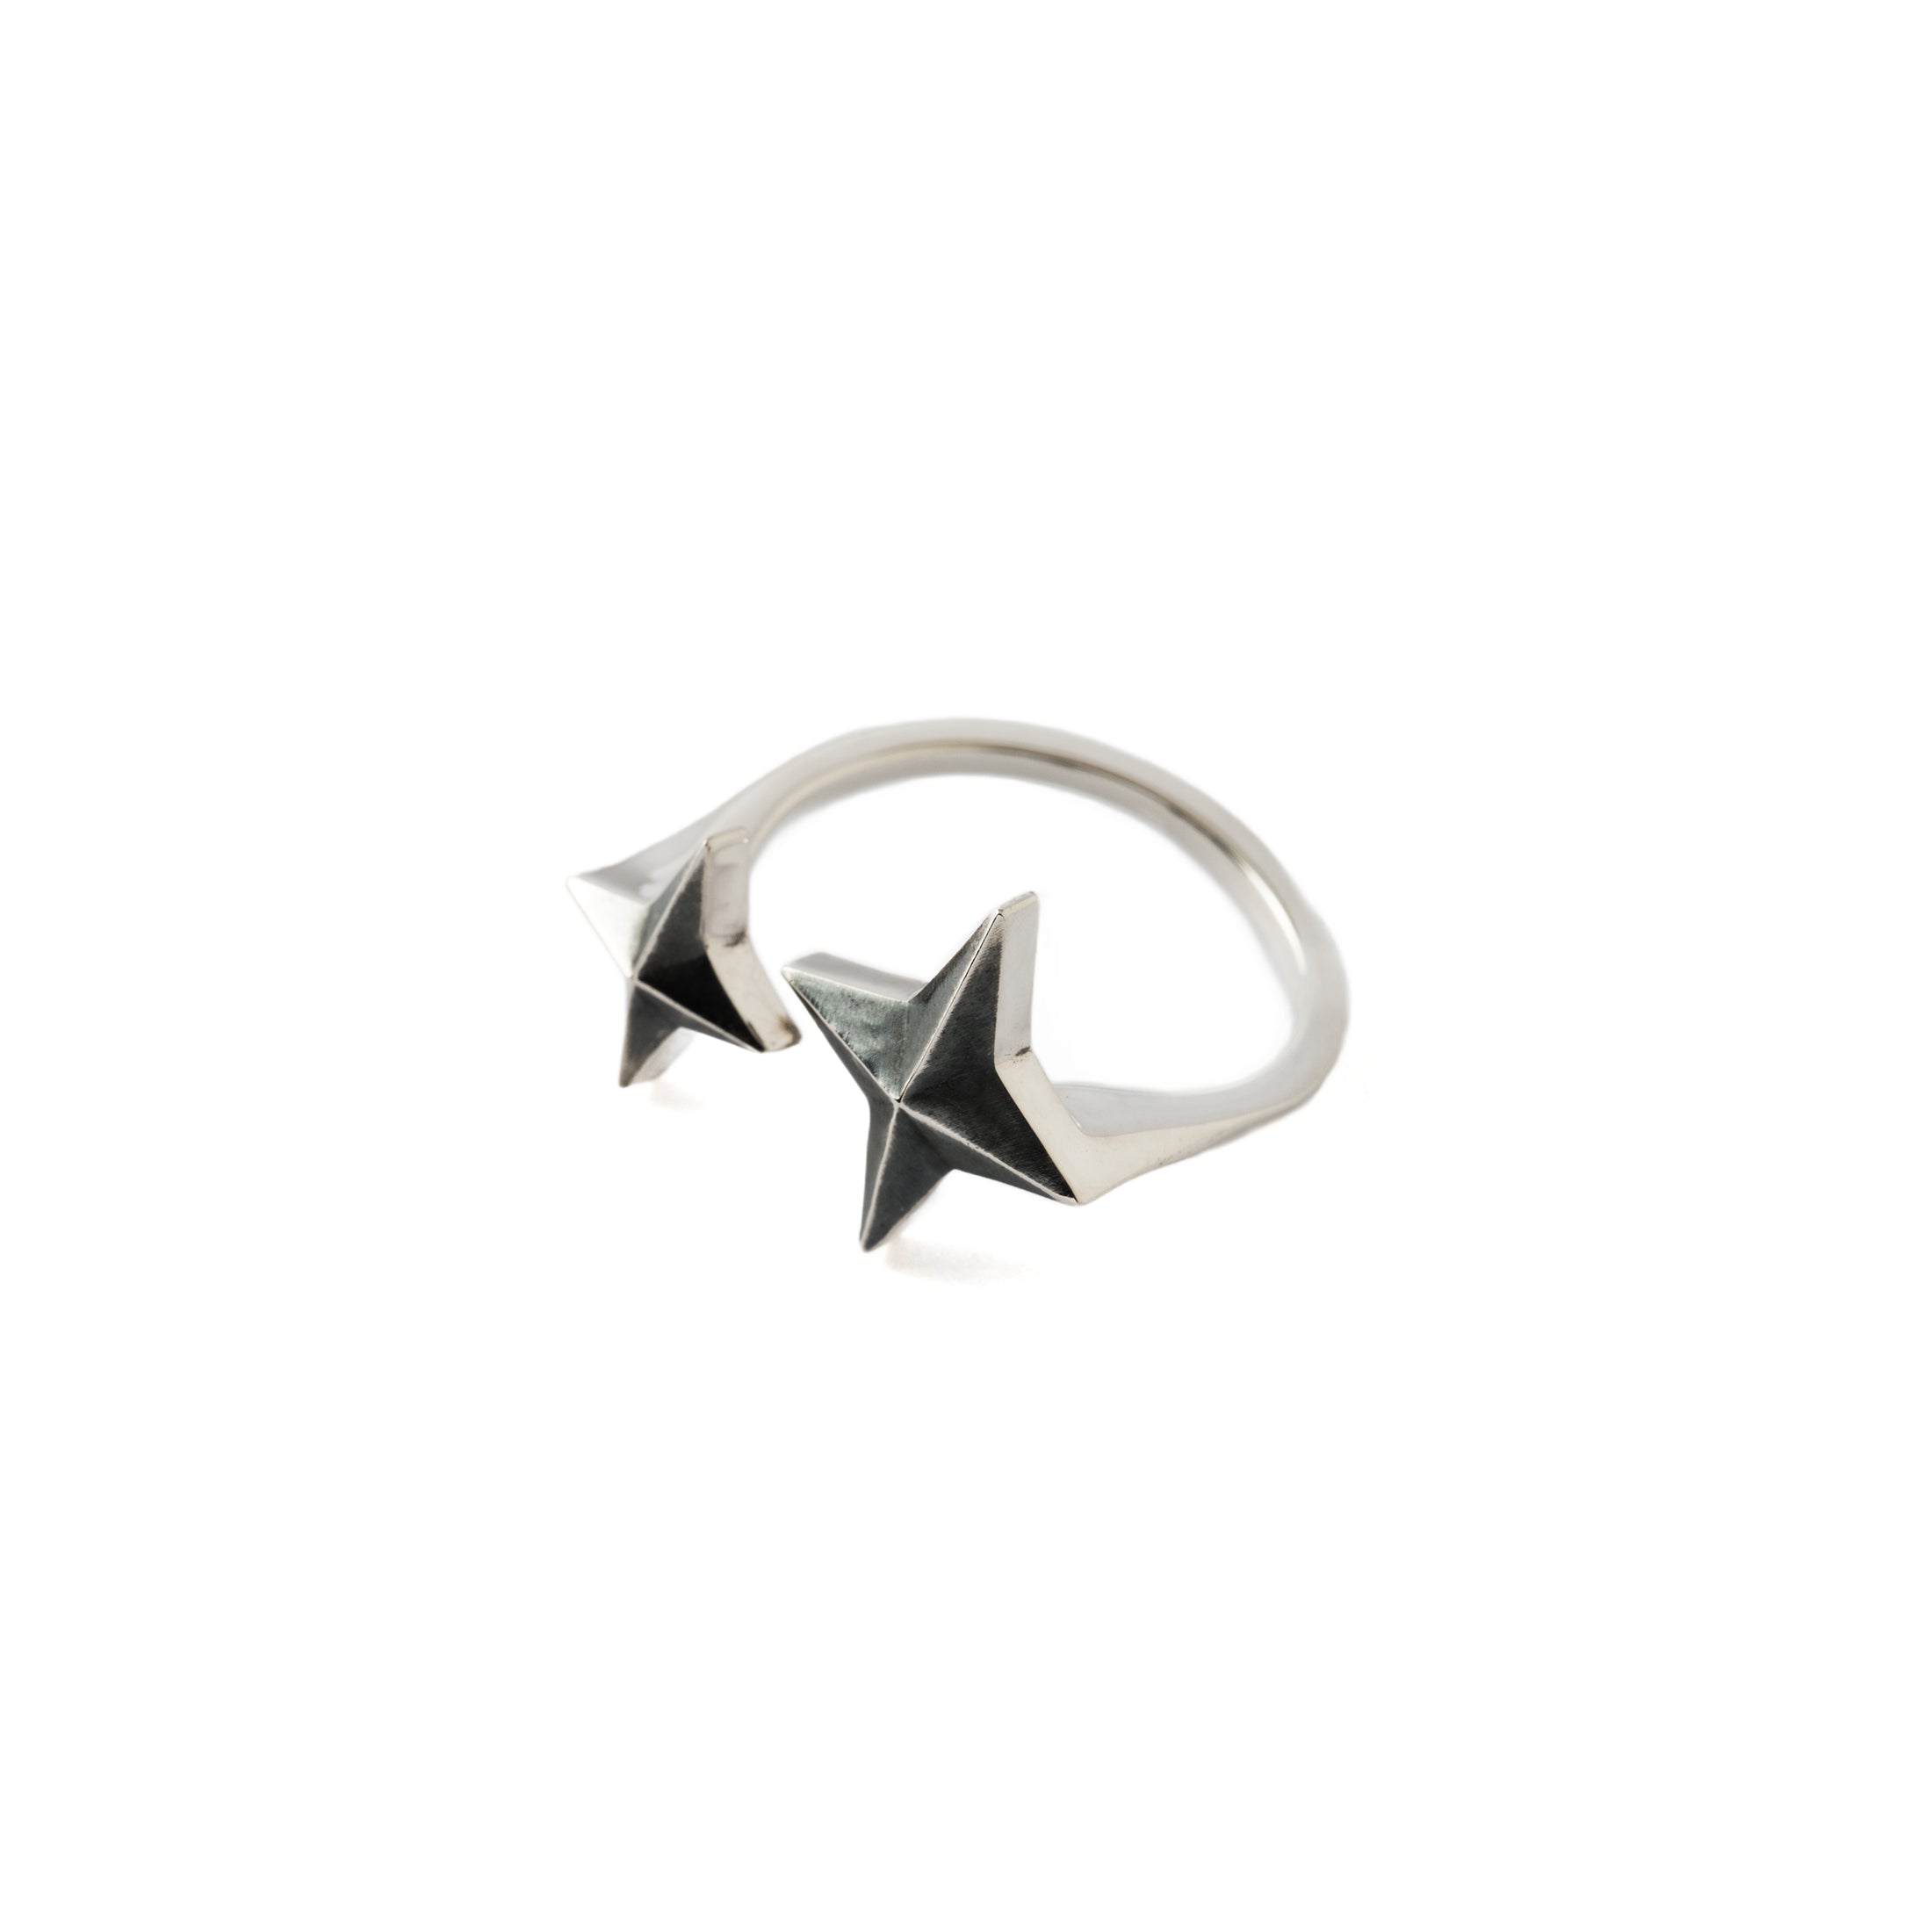 North Star Silver Ring left side view